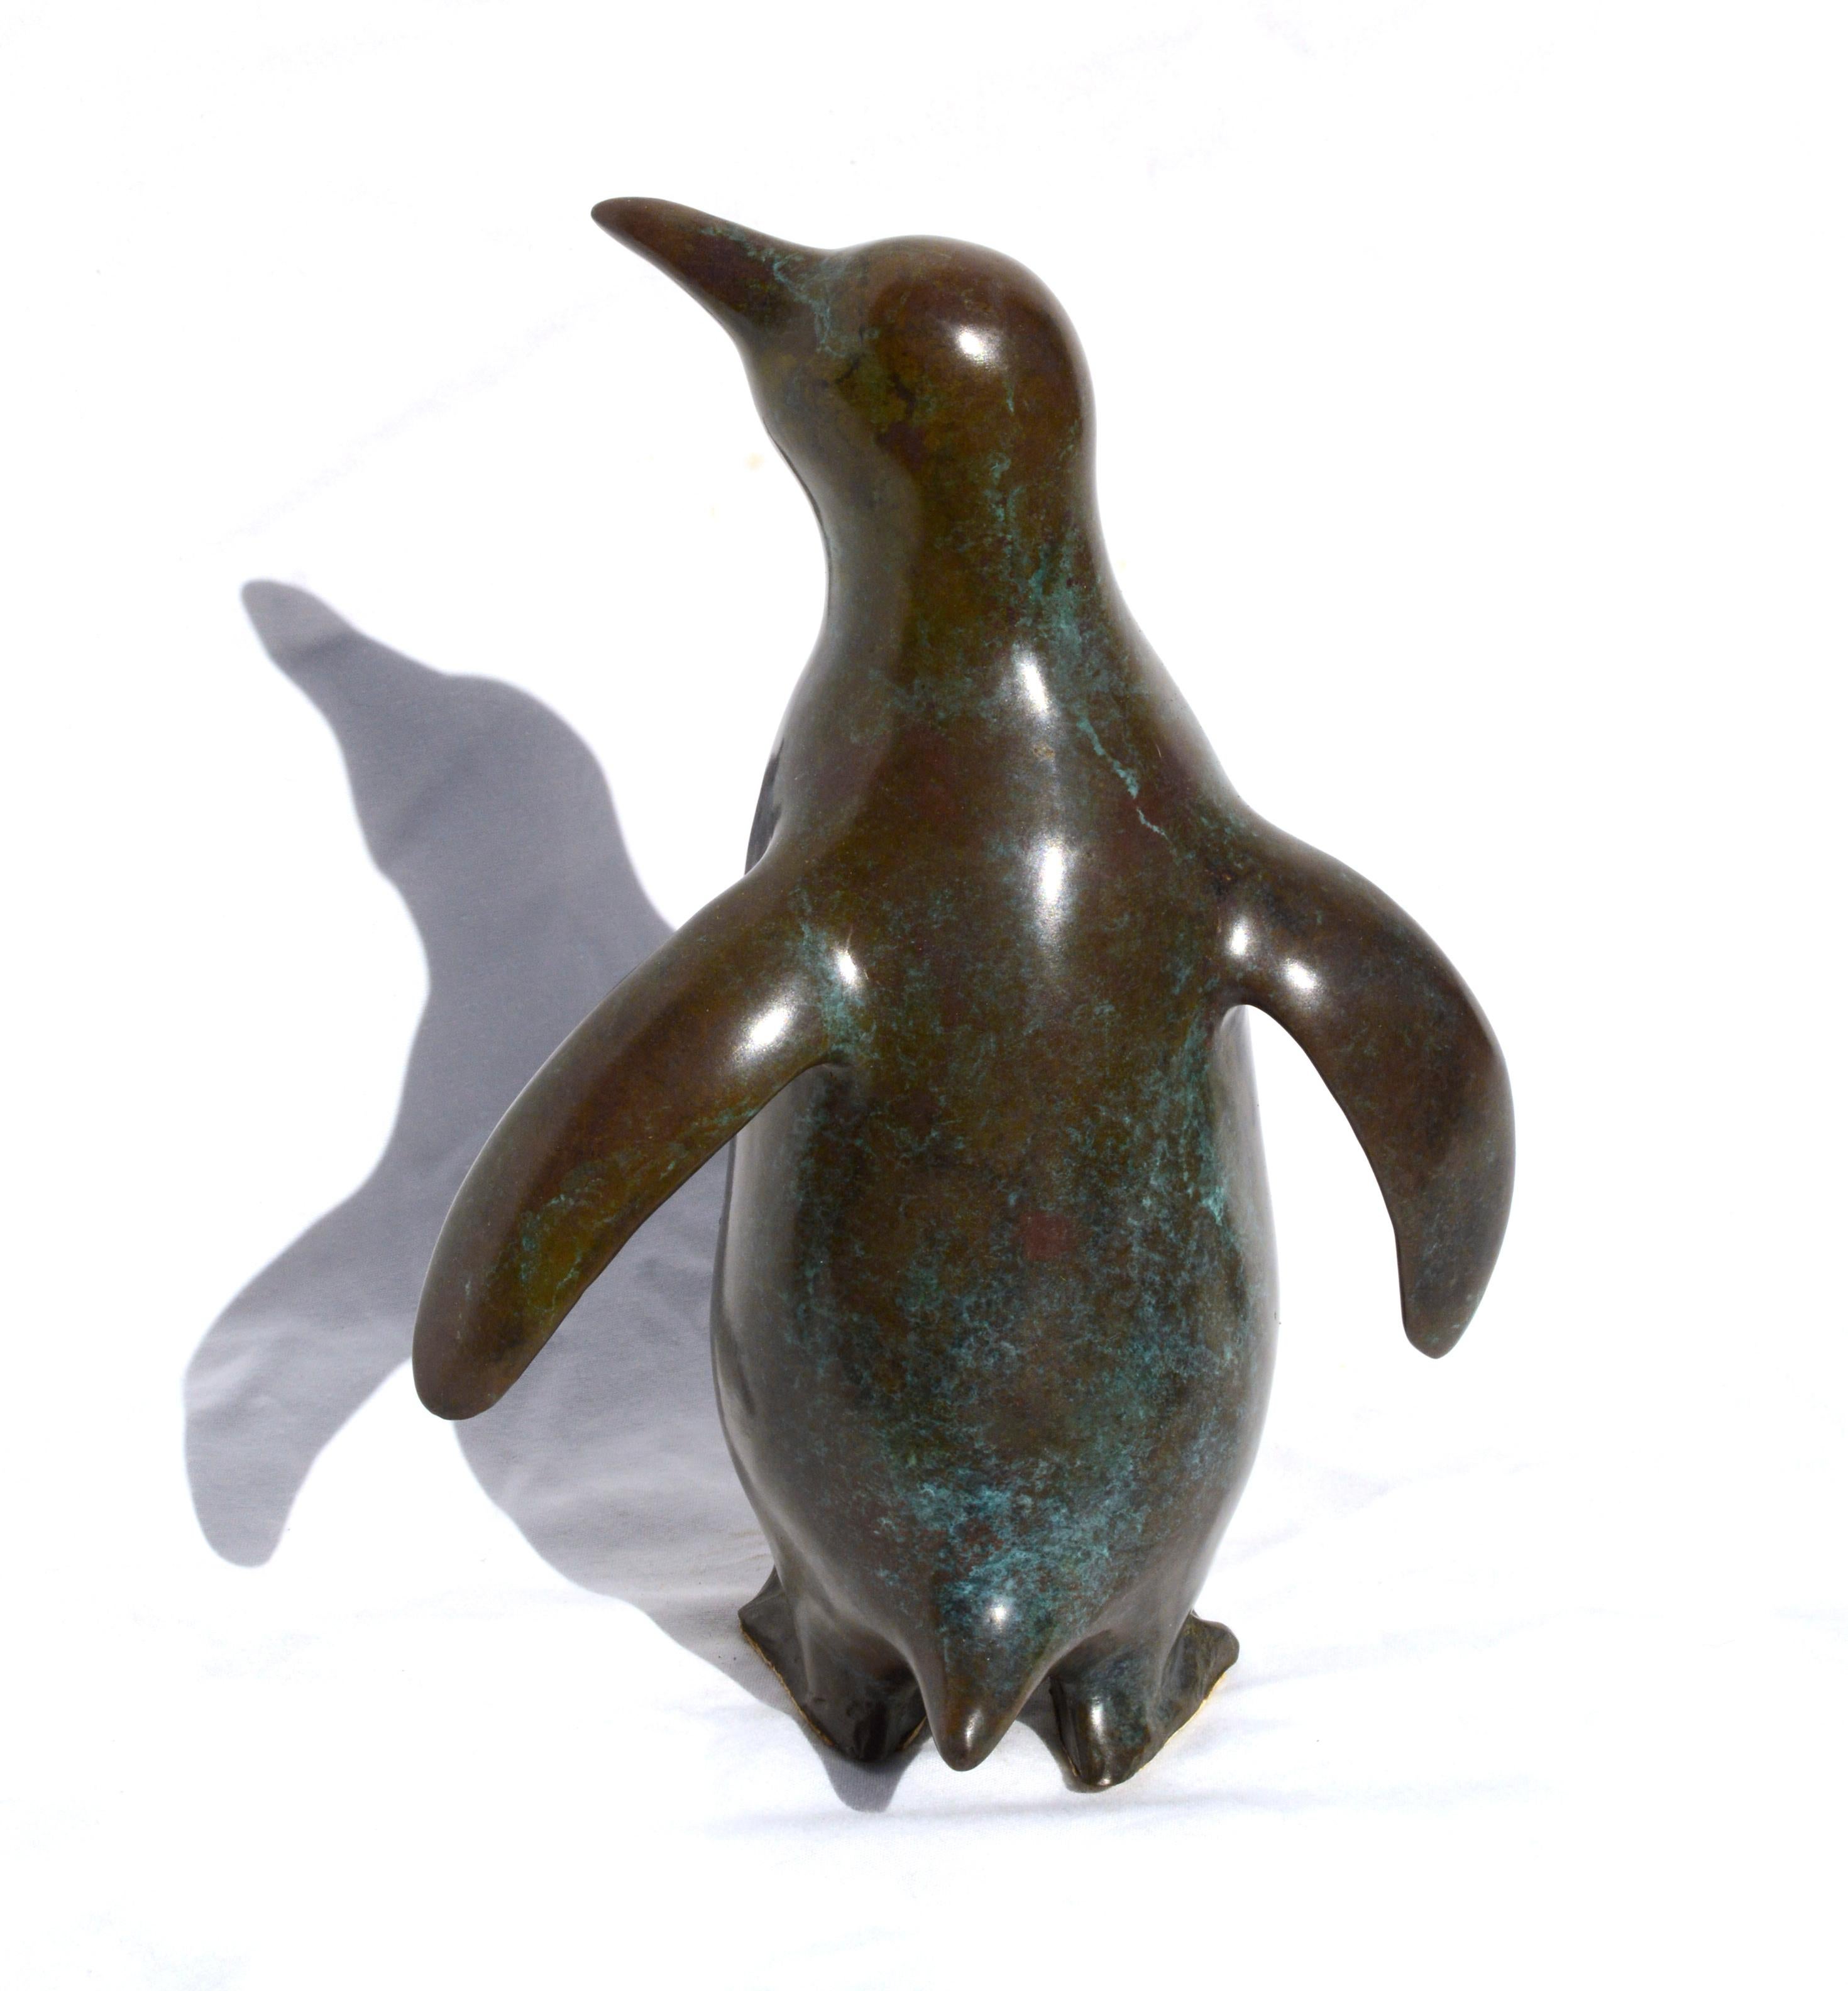 Bronze sculpture of a penguin by Winston Walter Carmean (American, 1925-2010).  Small Limited Edition run of 50. Signed, numbered, and dated 